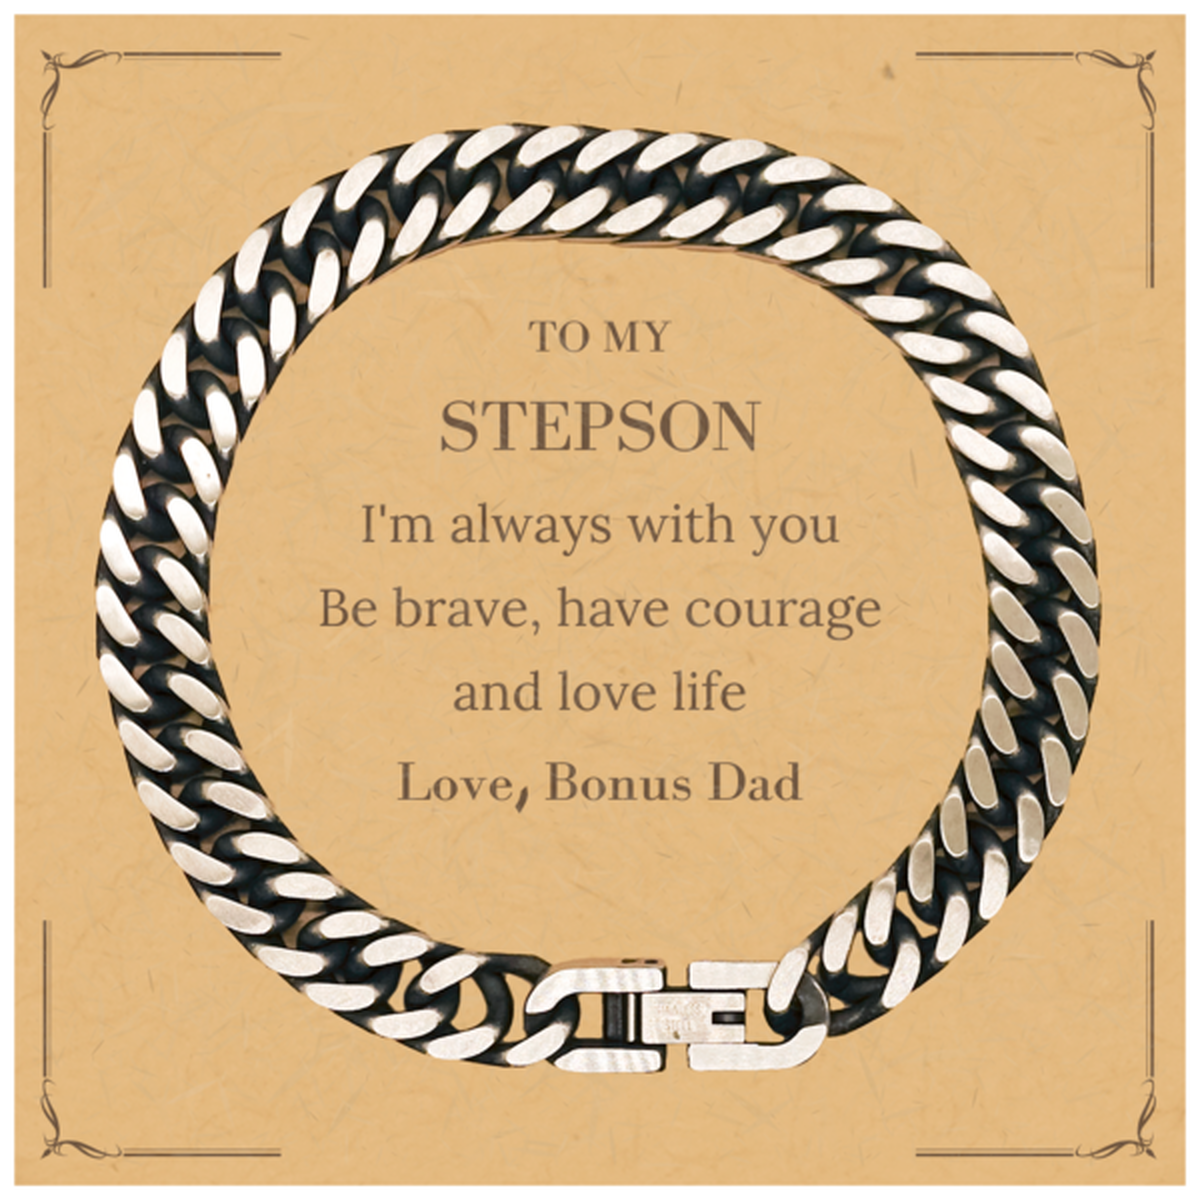 To My Stepson Gifts from Bonus Dad, Unique Cuban Link Chain Bracelet Inspirational Christmas Birthday Graduation Gifts for Stepson I'm always with you. Be brave, have courage and love life. Love, Bonus Dad